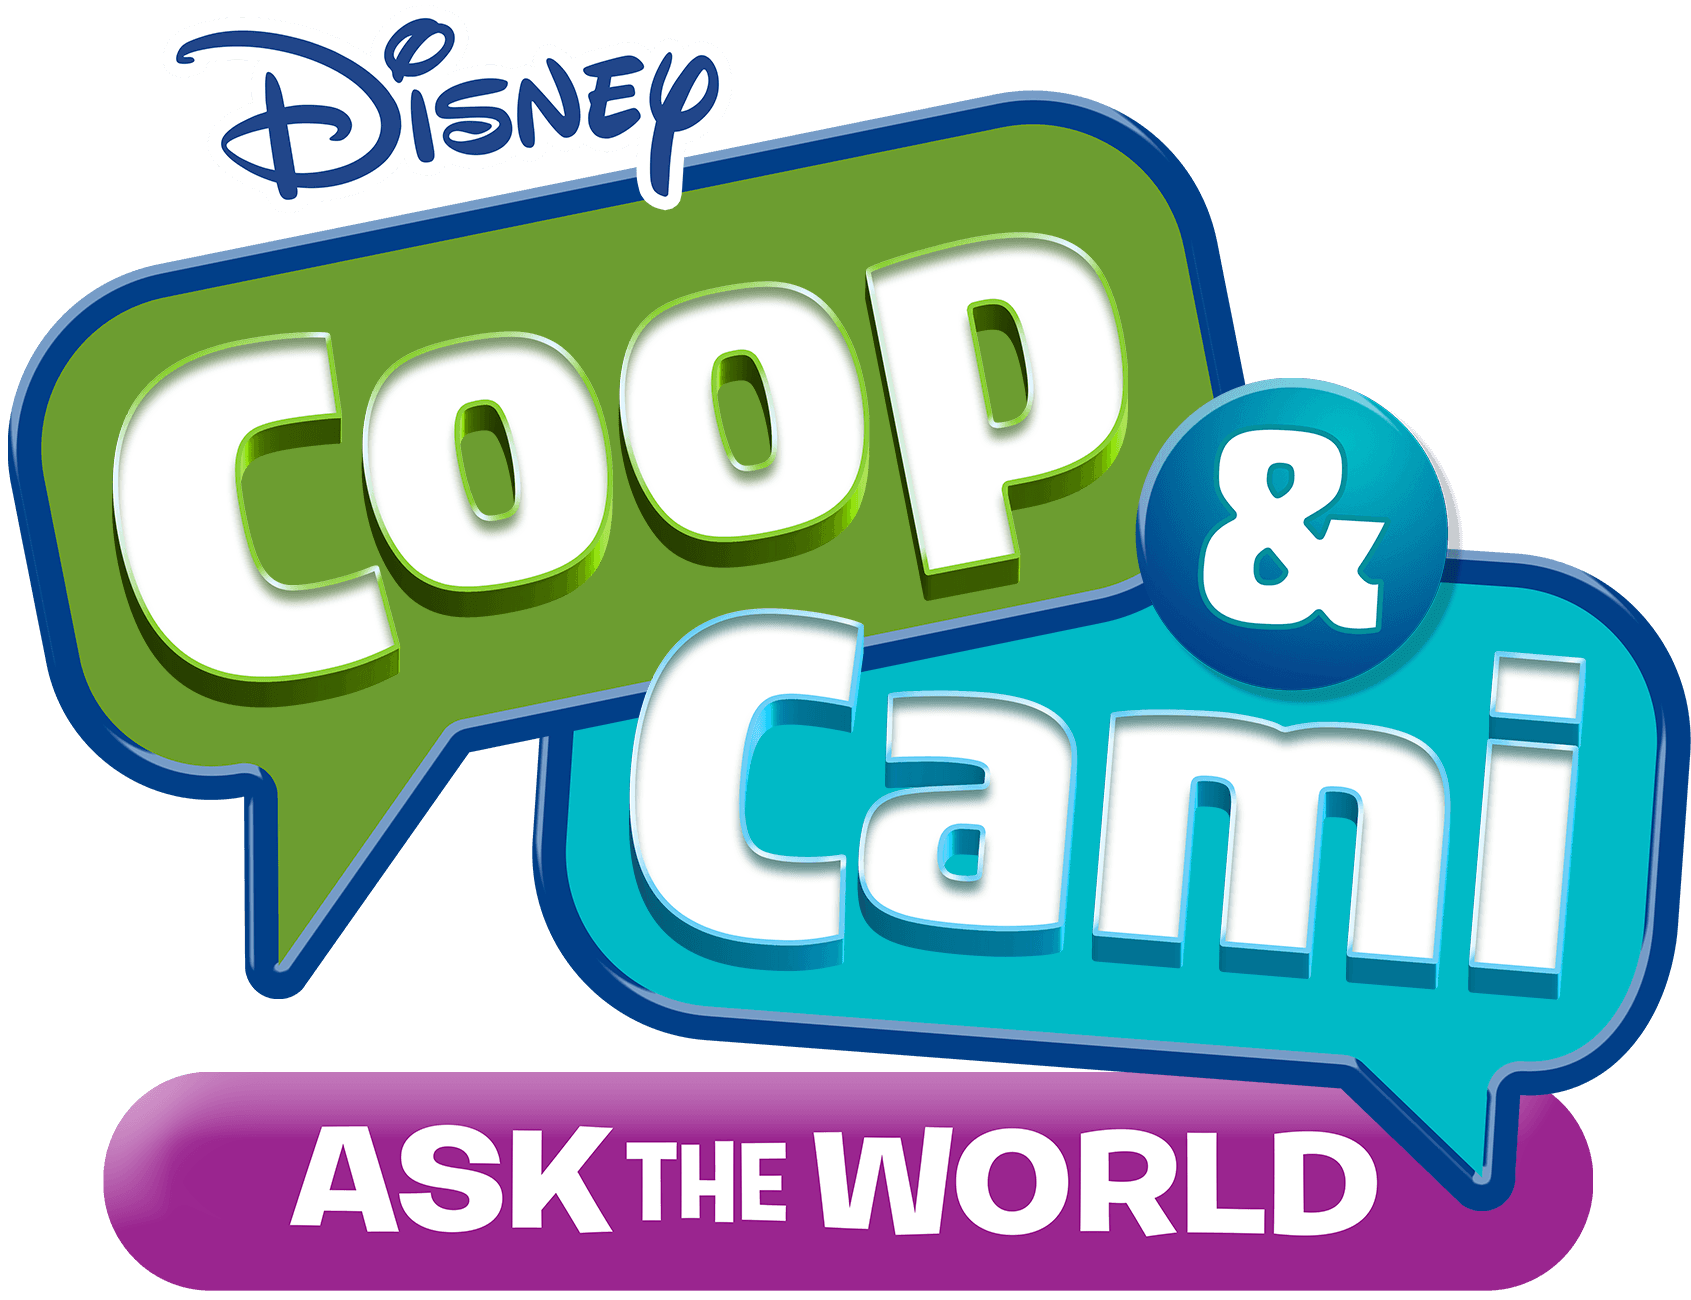 Coop & Cami Ask The World logo